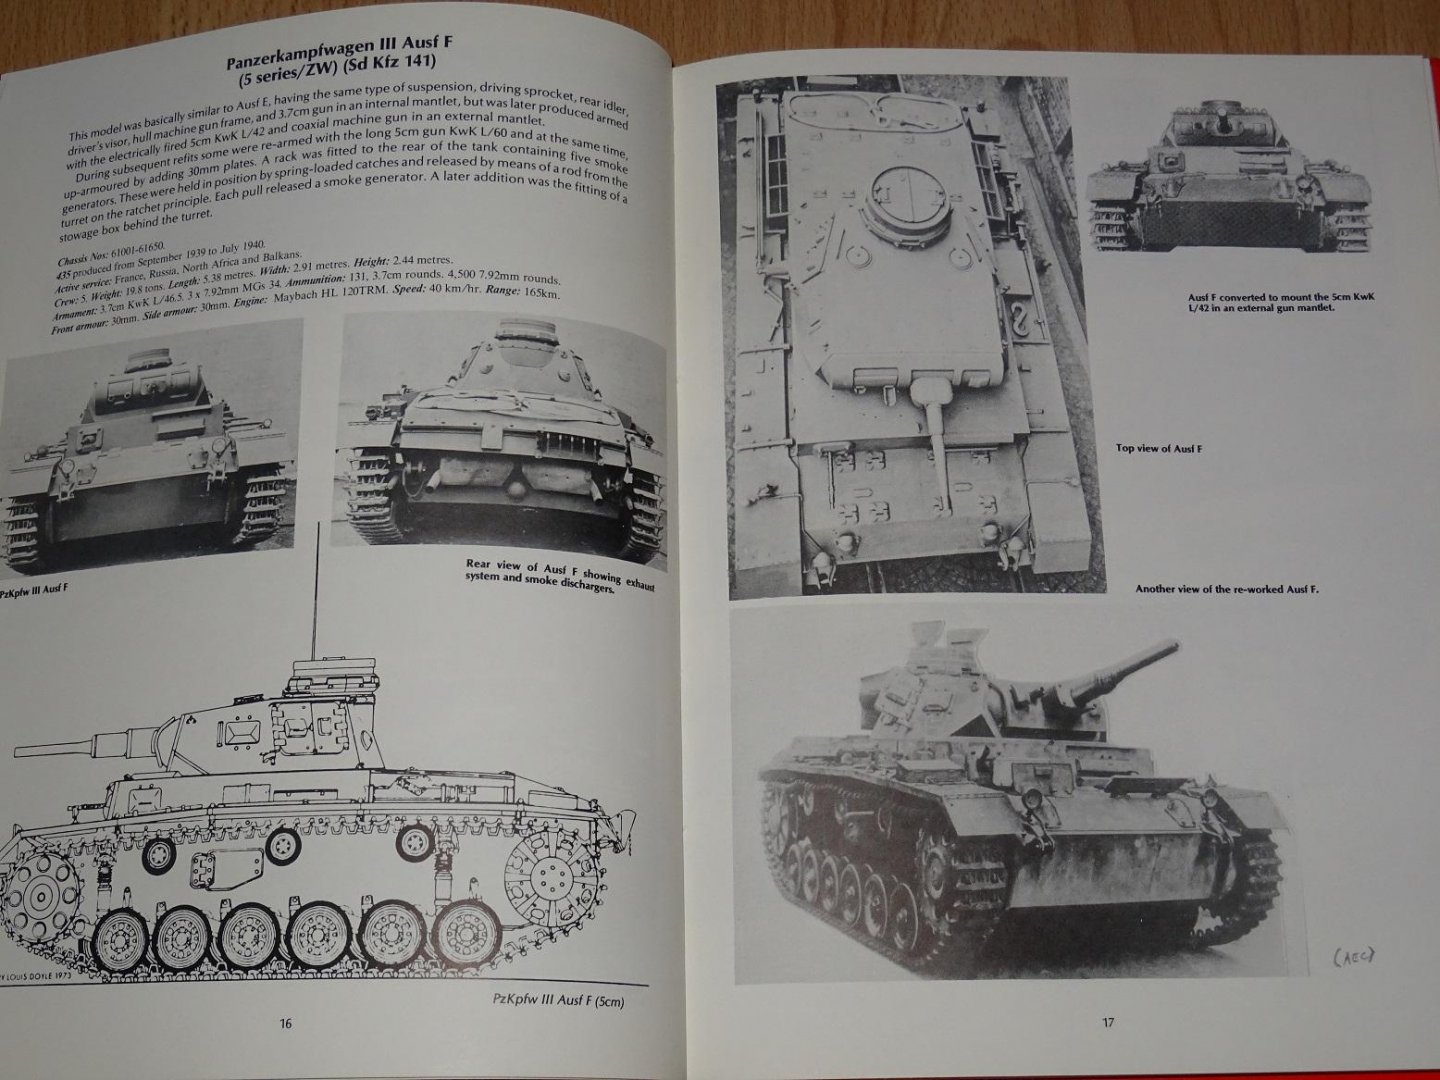 Chamberlain, P. & Doyle, H.L. - The Panzerkampfwagen III and IV Series and their Derivatives